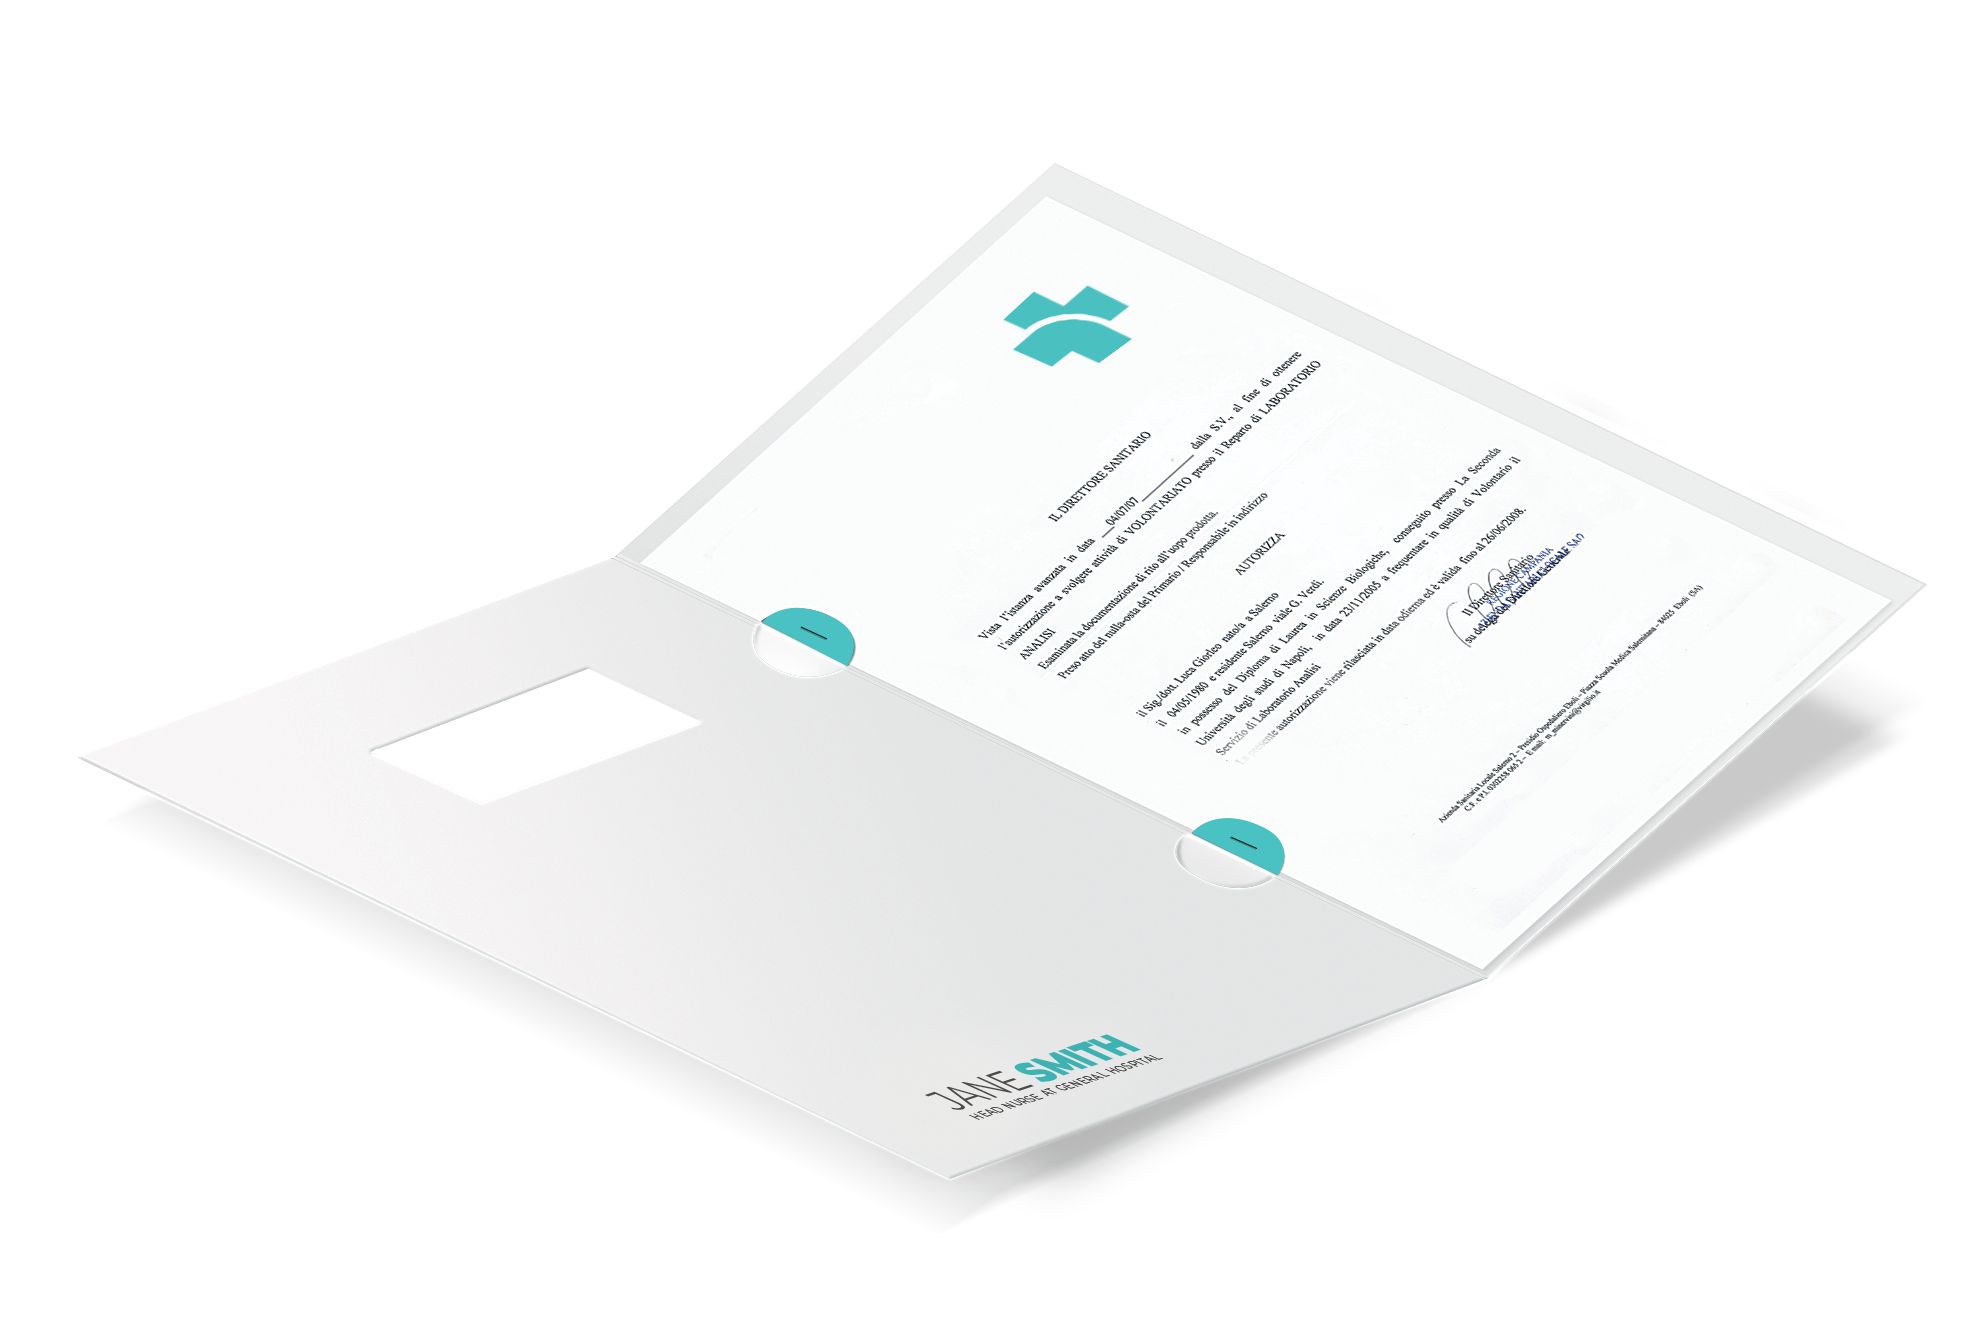 Medical file folders: * Useful and professional
* Finishings available
* Templates ready